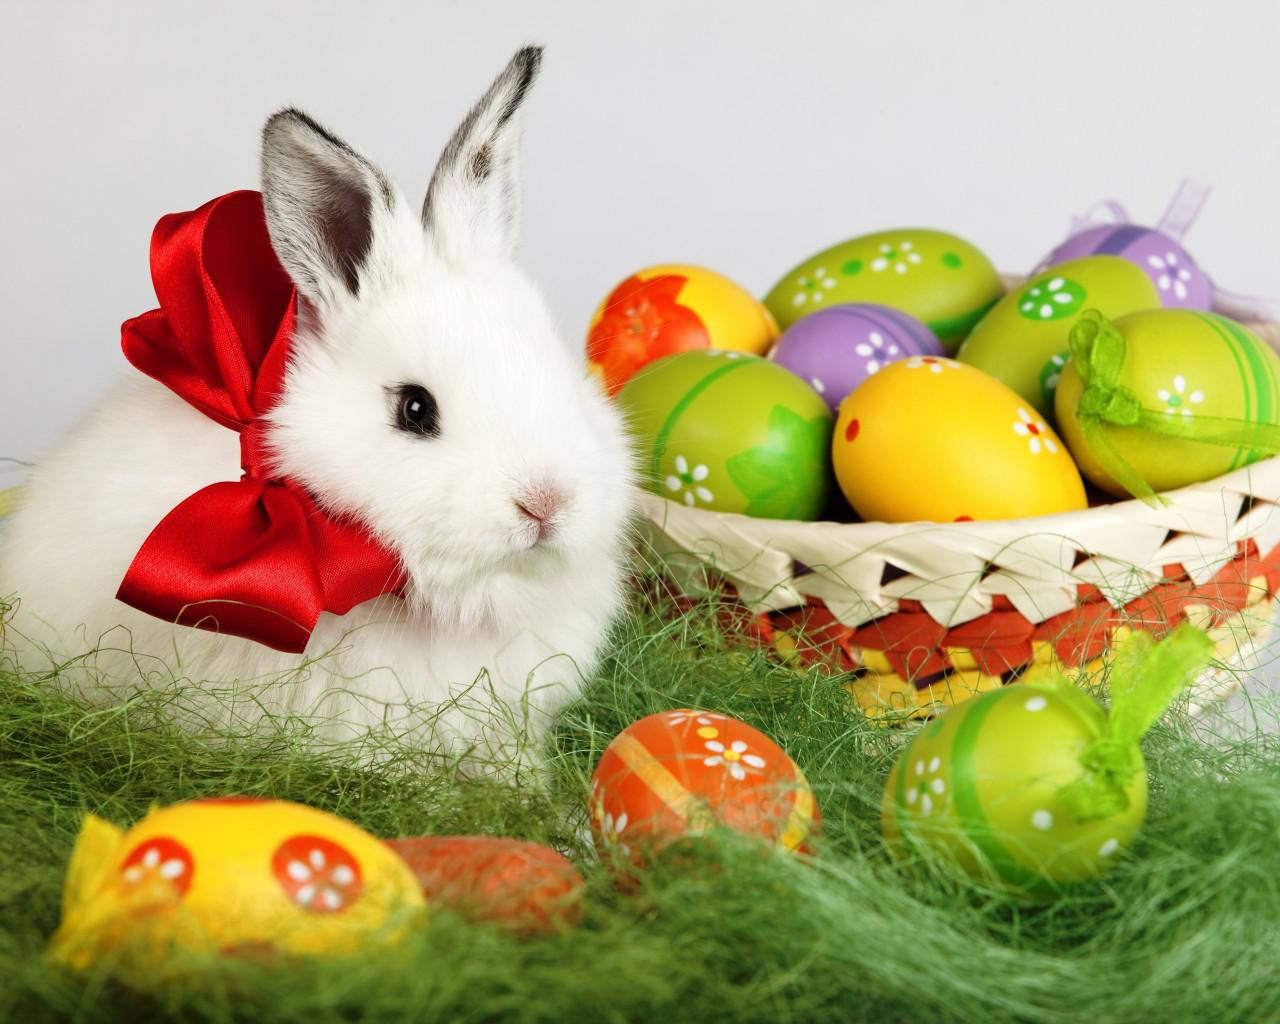 Cute Easter Bunny And Eggs Wallpaper